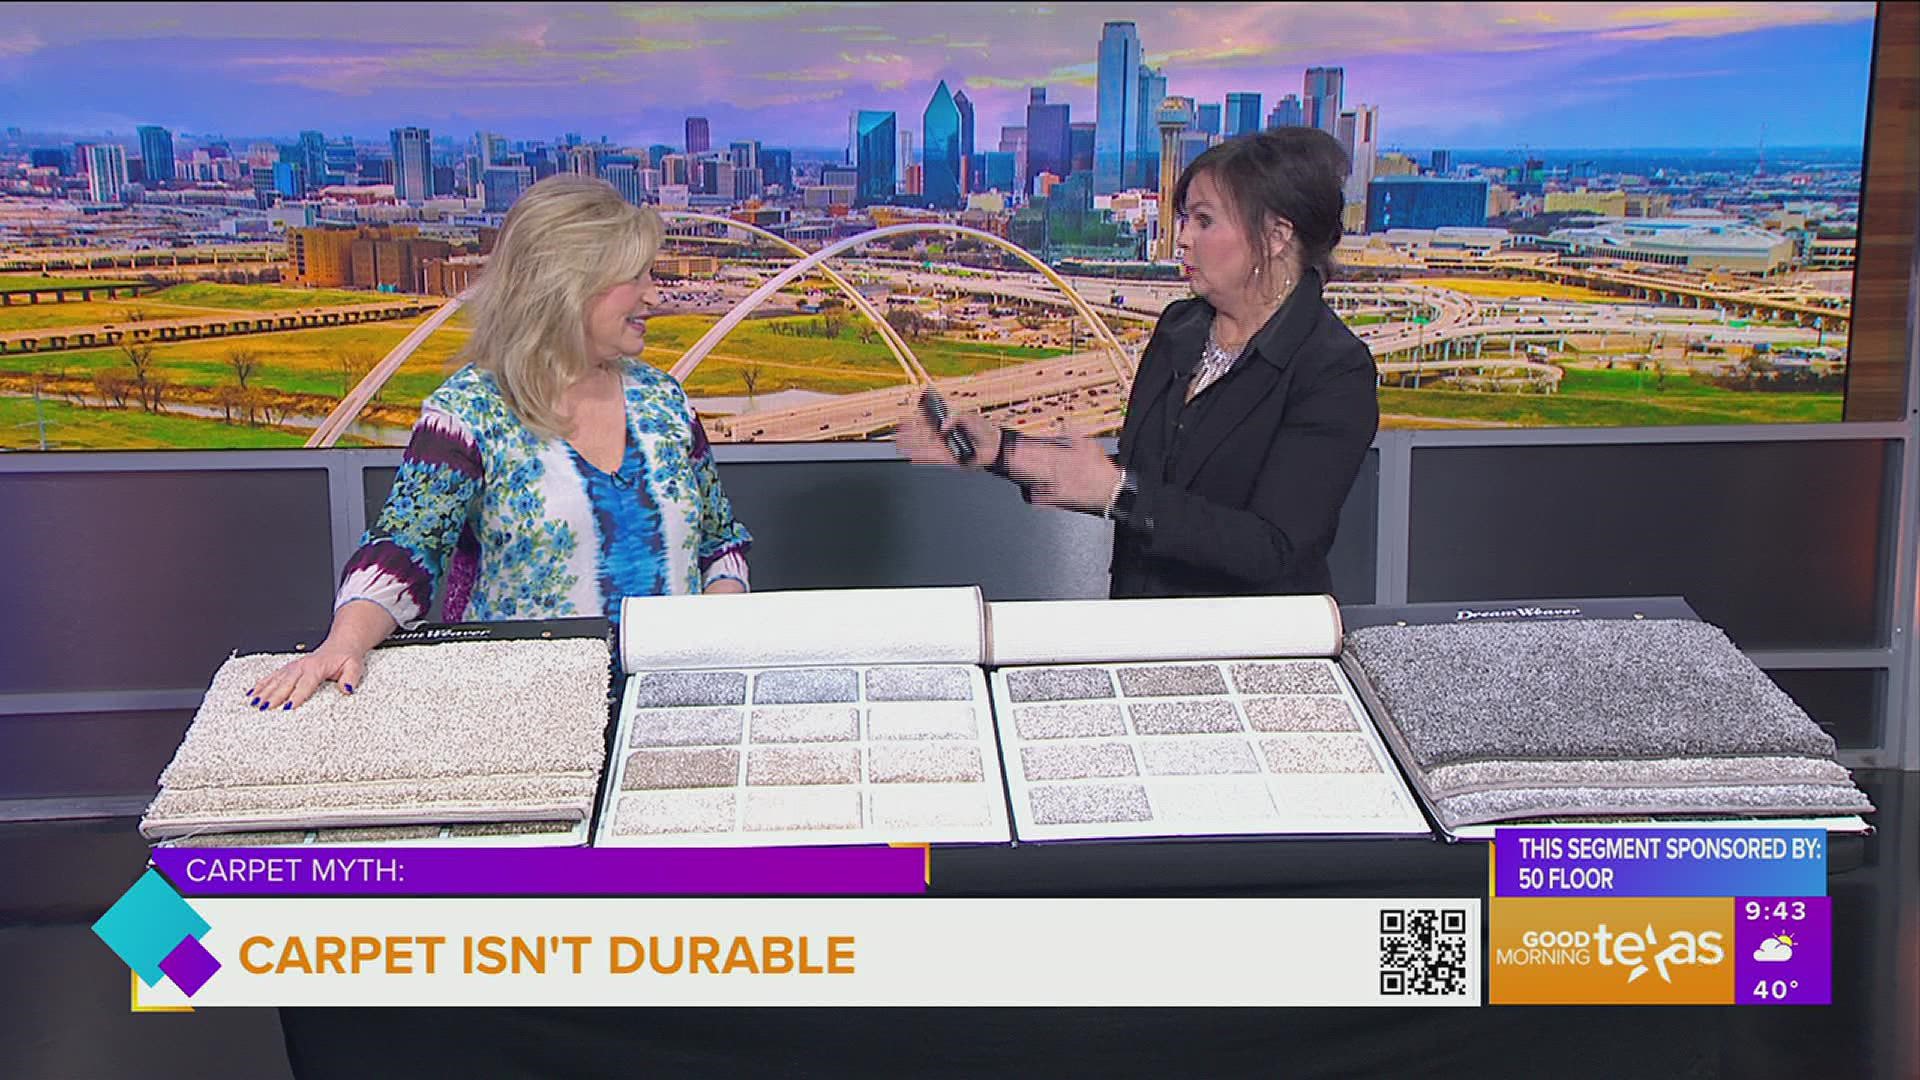 This segment is sponsored by 50 Floor. Rebecca Miller stops by to discuss some common carpet myths. Call 877.50FLOOR or go to 50Floor.com for more information.